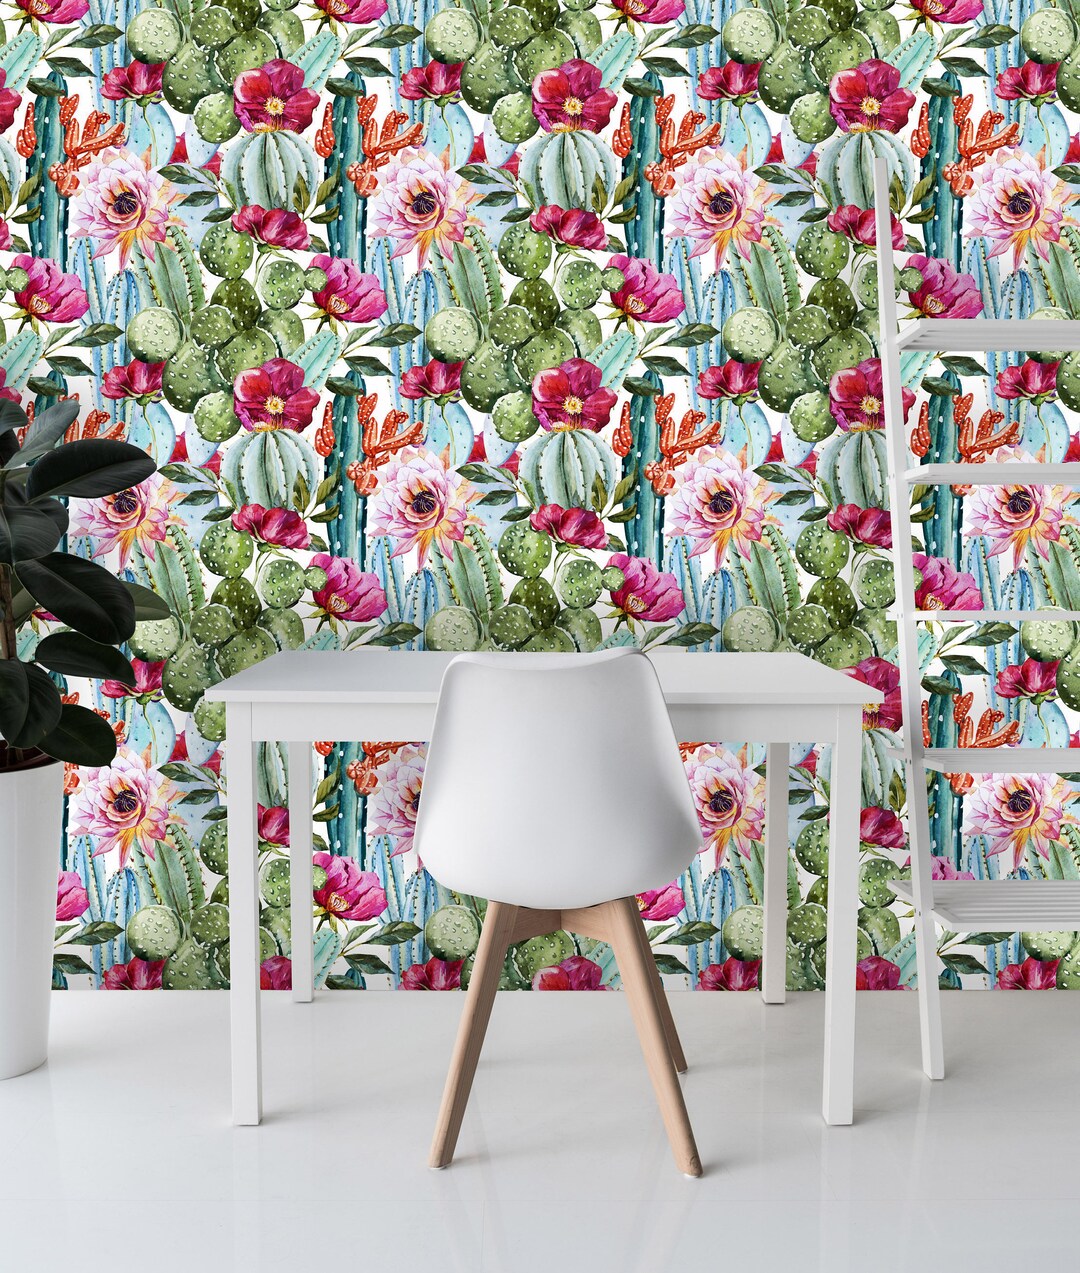 Removable Wallpaper Mural Peel & Stick Cactus With Flowers - Etsy